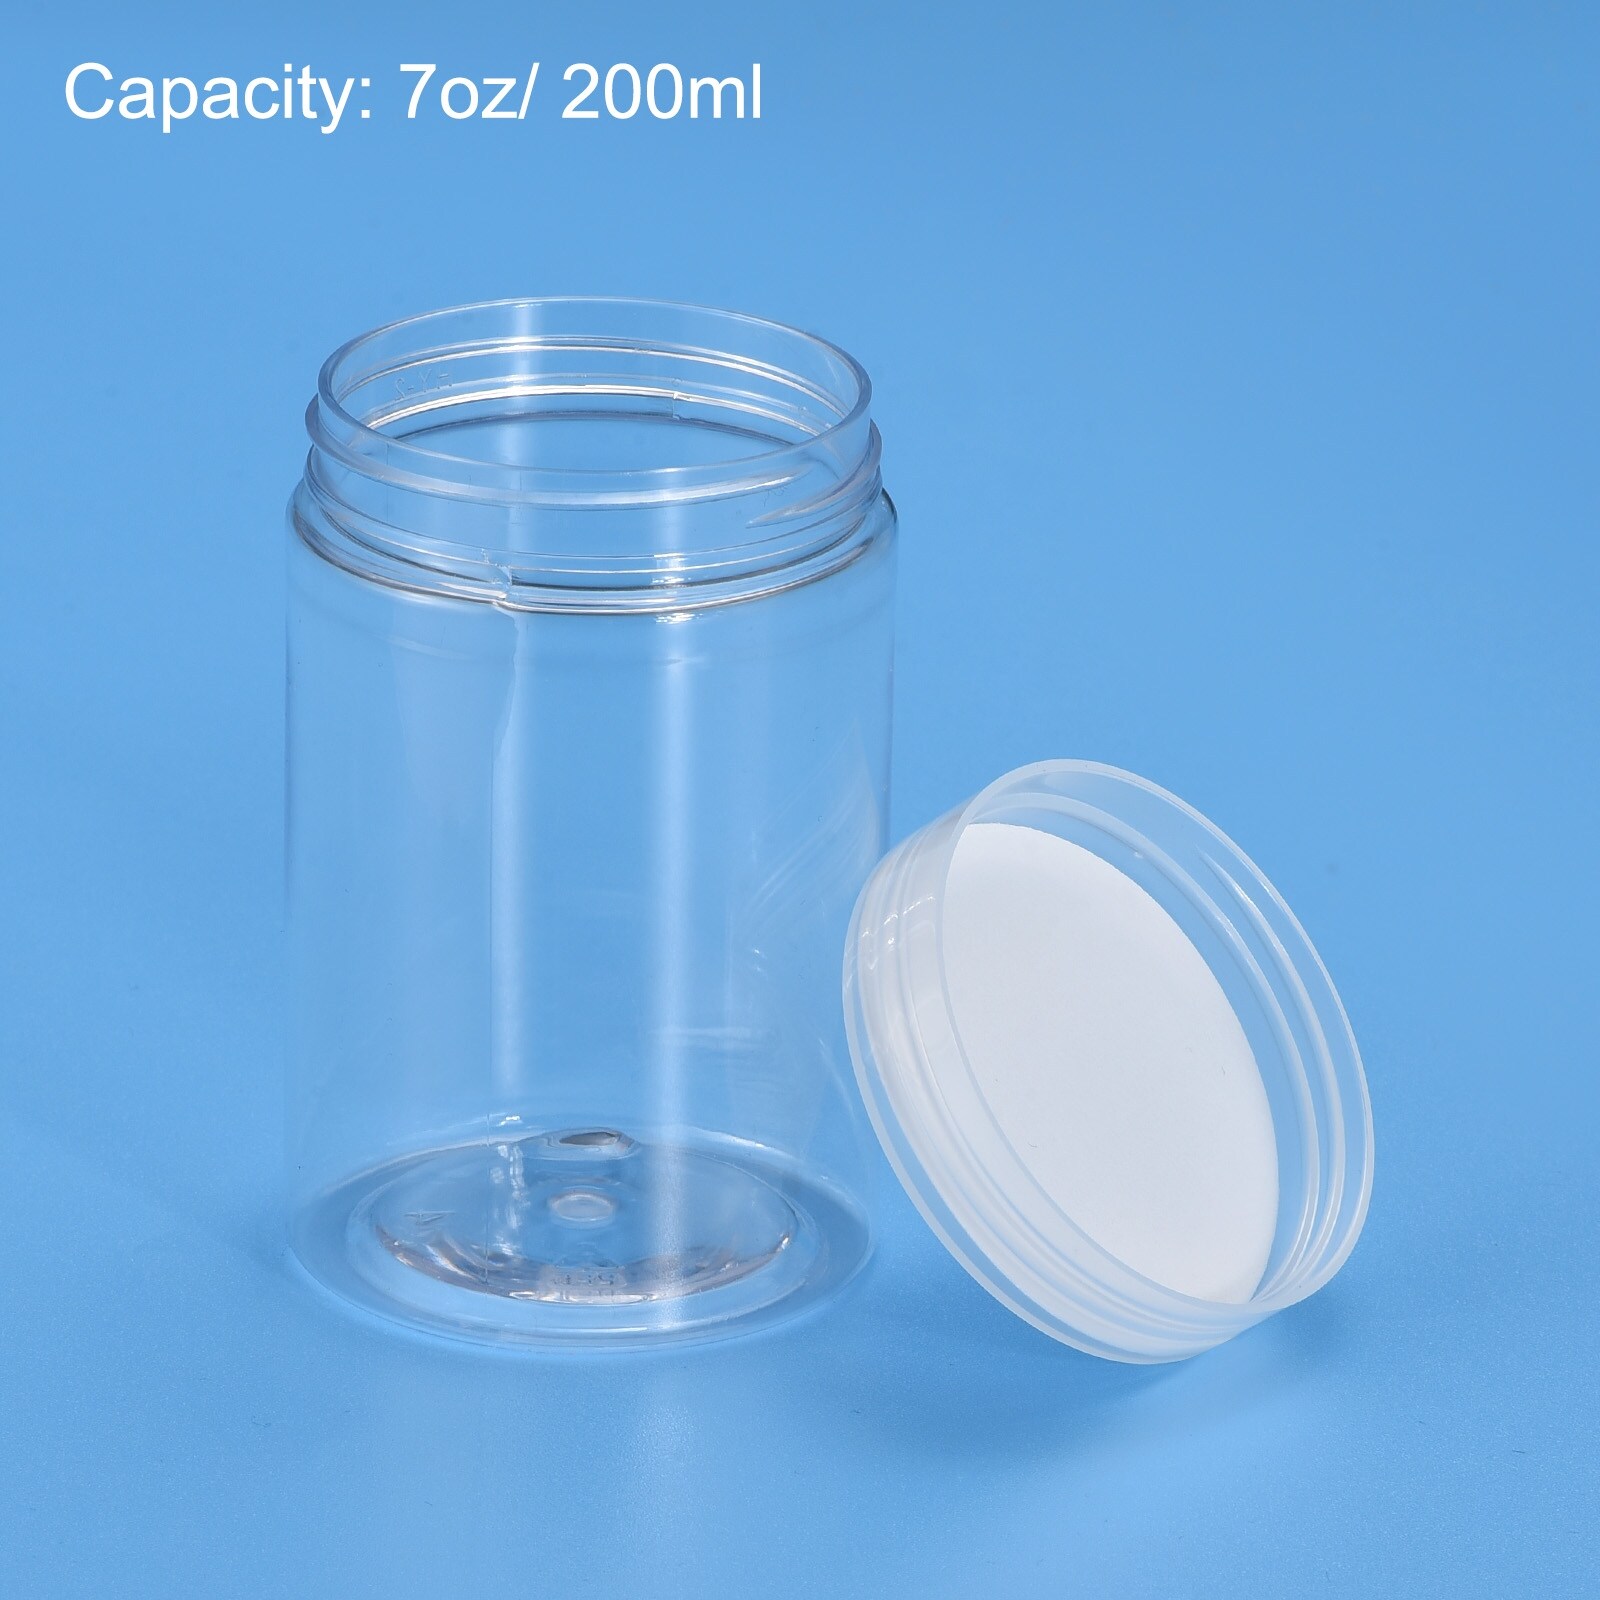 https://ak1.ostkcdn.com/images/products/is/images/direct/3d20f32b3fe1cb741cab402df9e523f4e1da18a4/Round-Plastic-Jars-with-Transparent-Screw-Top-Lid%2C-12Pcs.jpg